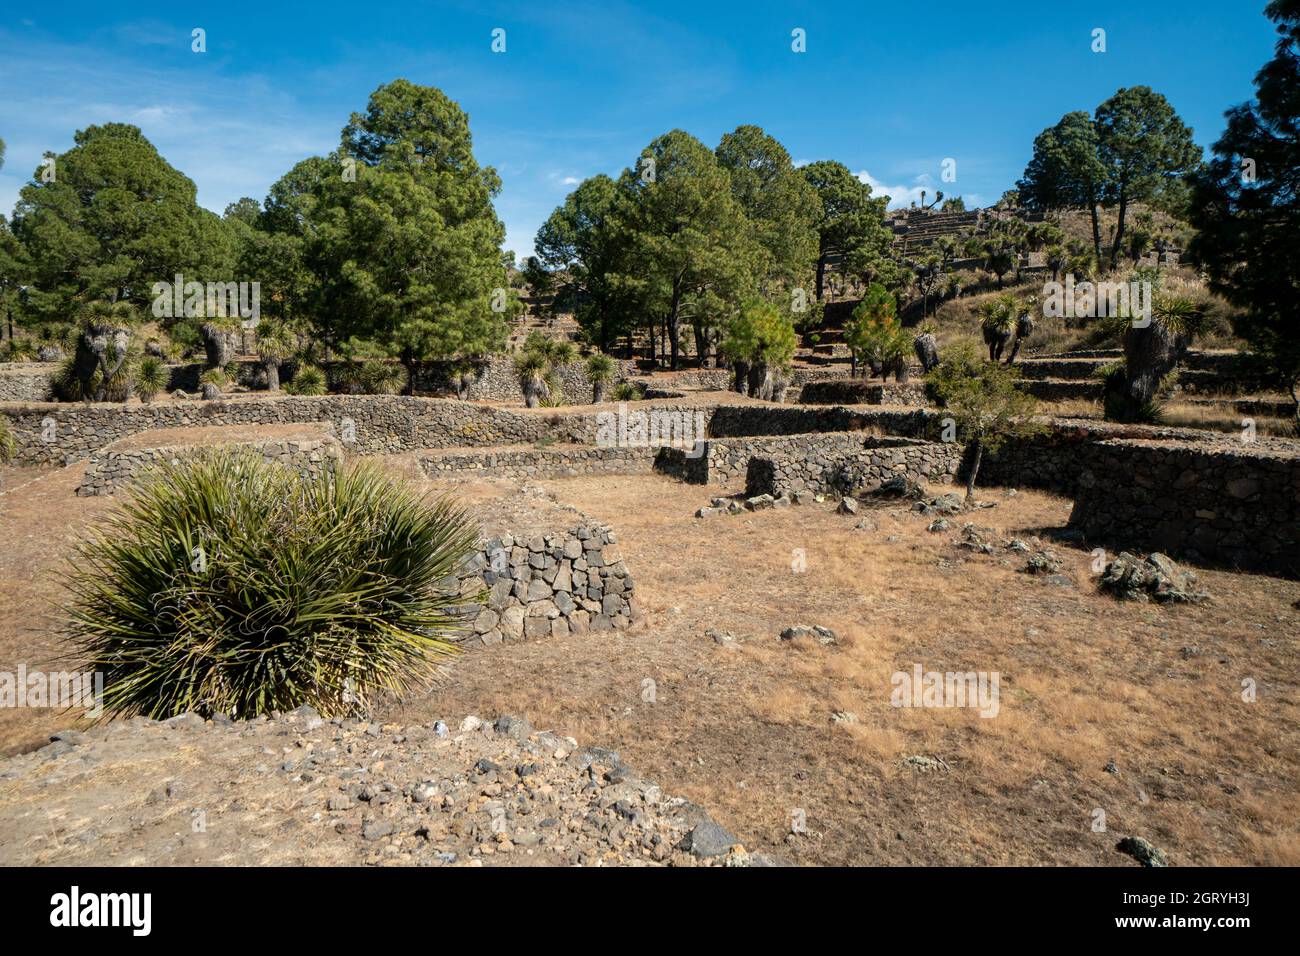 Cantona, Puebla, Mexico - A Mesoamerican Archaeoligical Site With Only Few Visitors Stock Photo